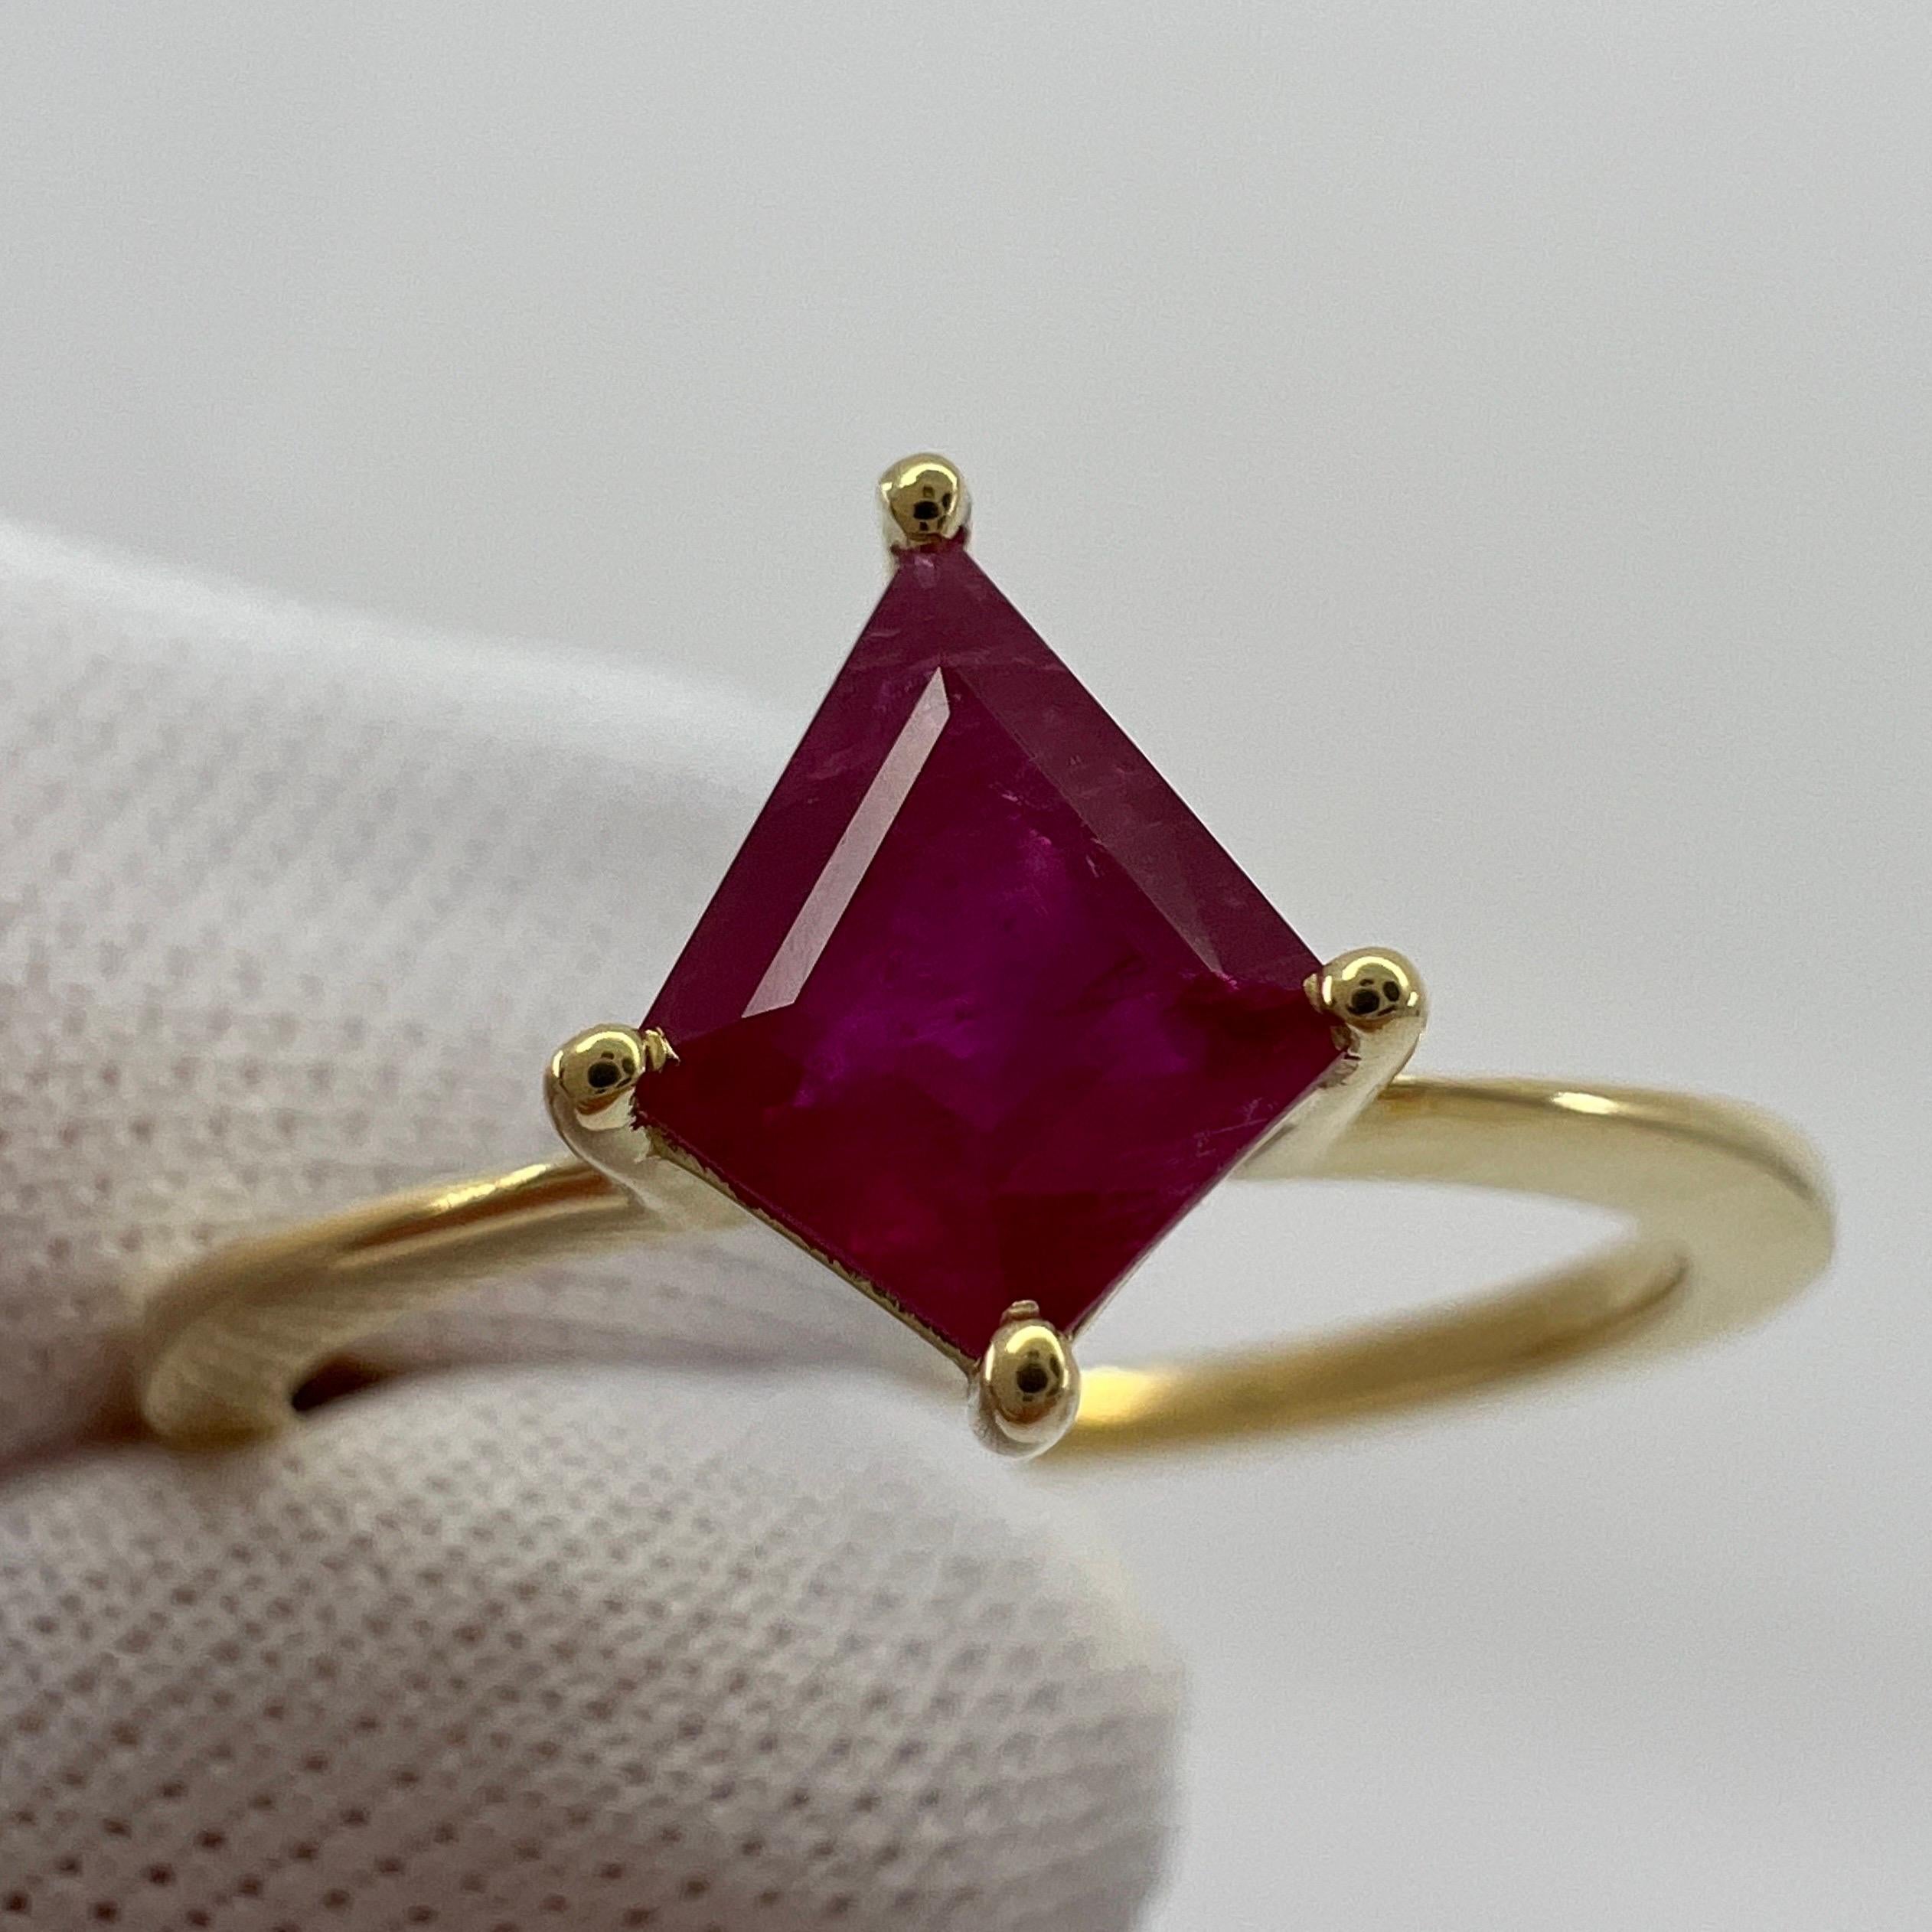 0.73 Carat Pinkish Red Ruby Fancy Kite Cut 18k Yellow Gold Modern Solitaire Ring For Sale 6